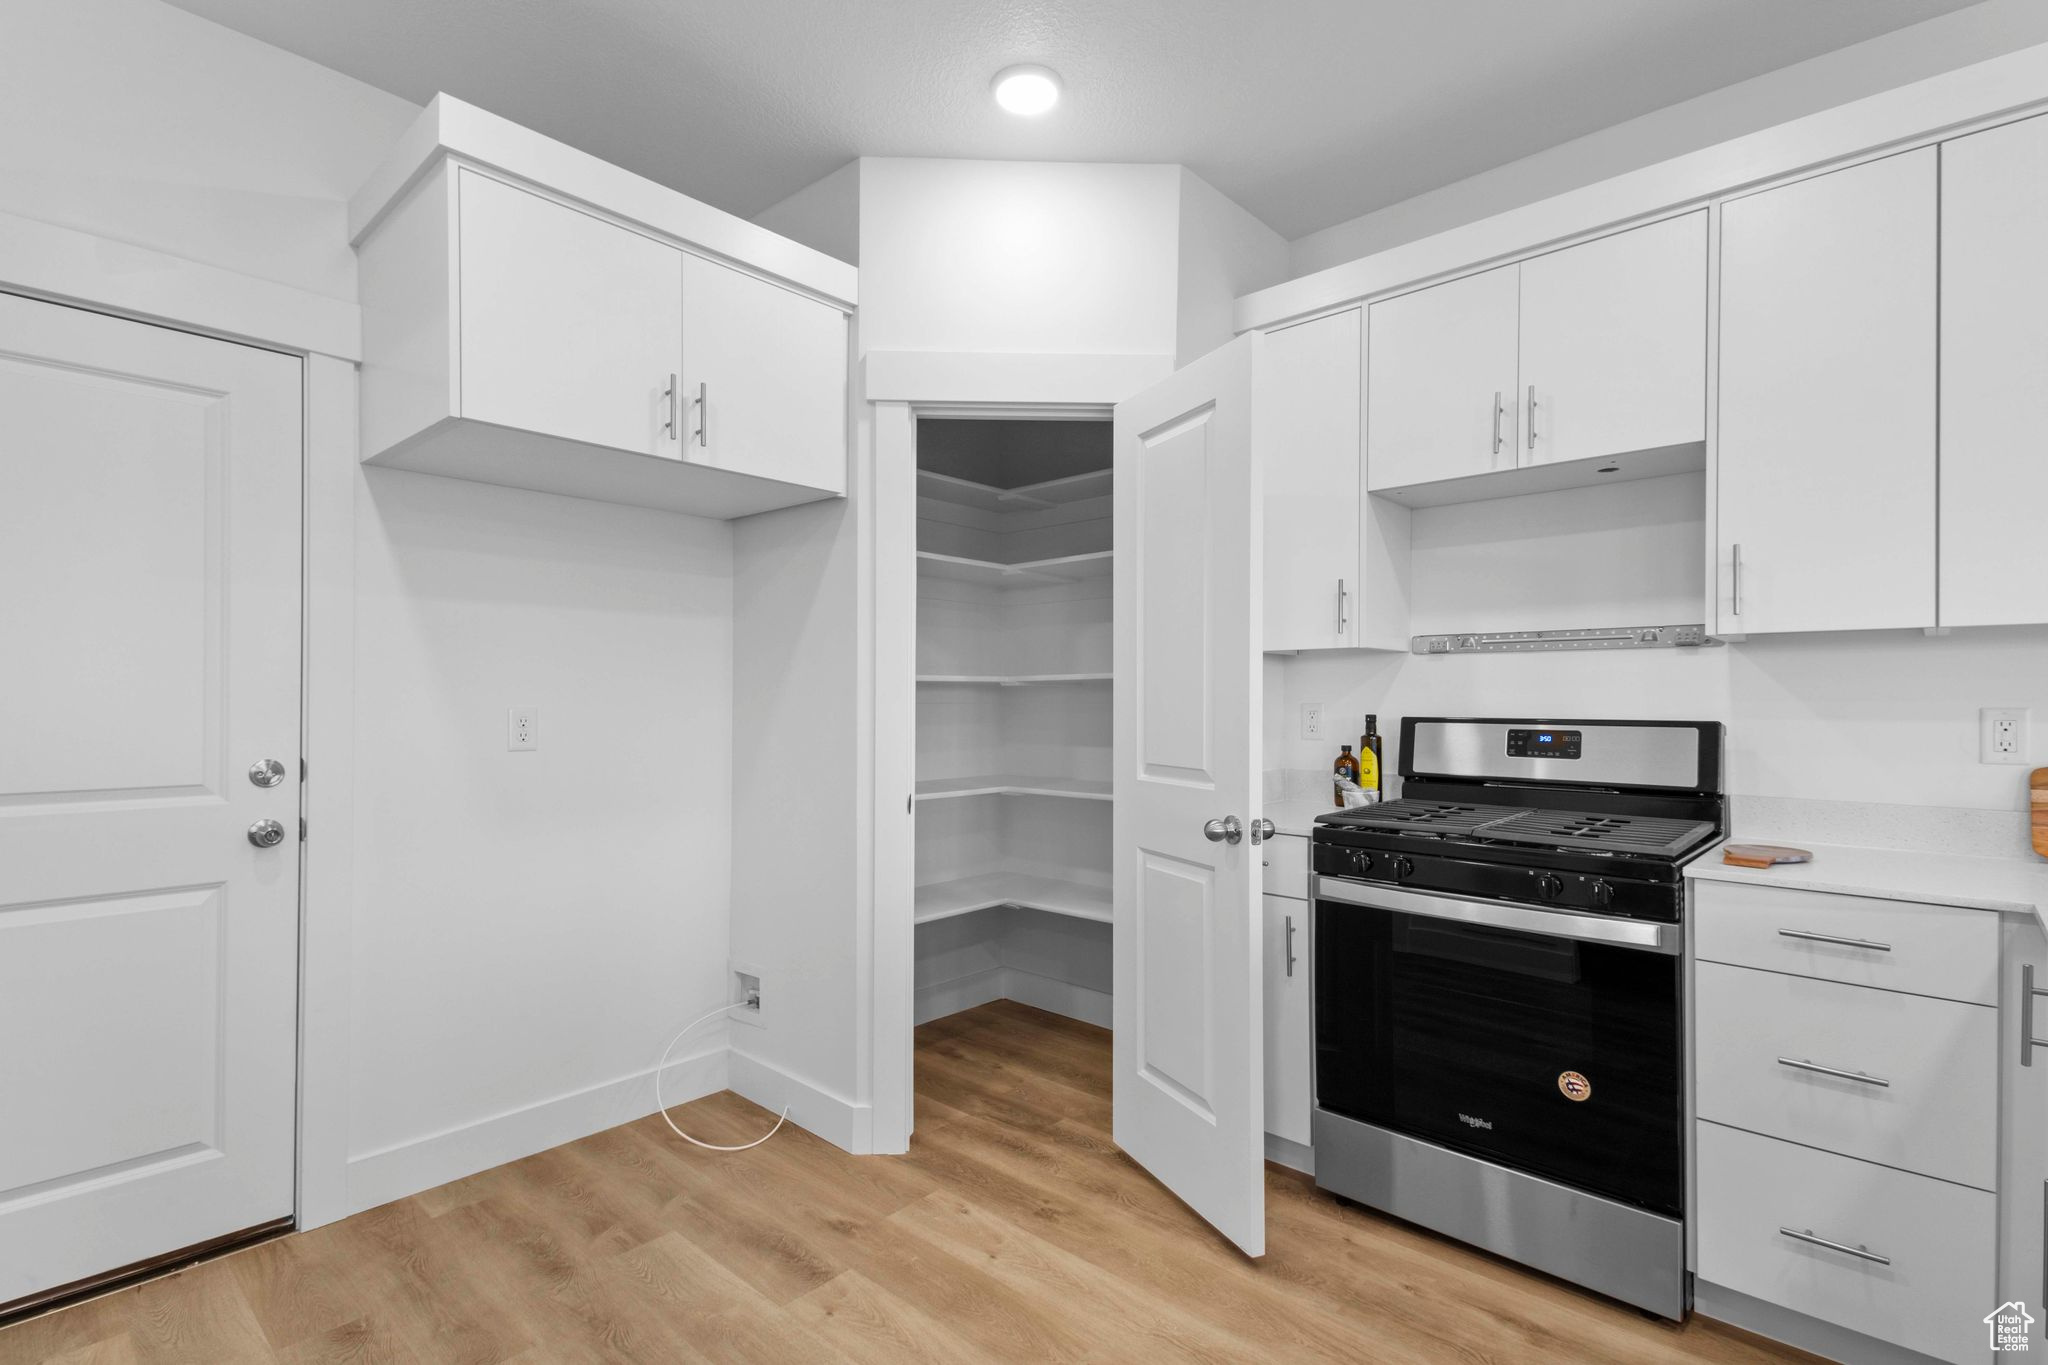 Kitchen featuring white cabinets, light hardwood / wood-style floors, and stainless steel range with gas cooktop